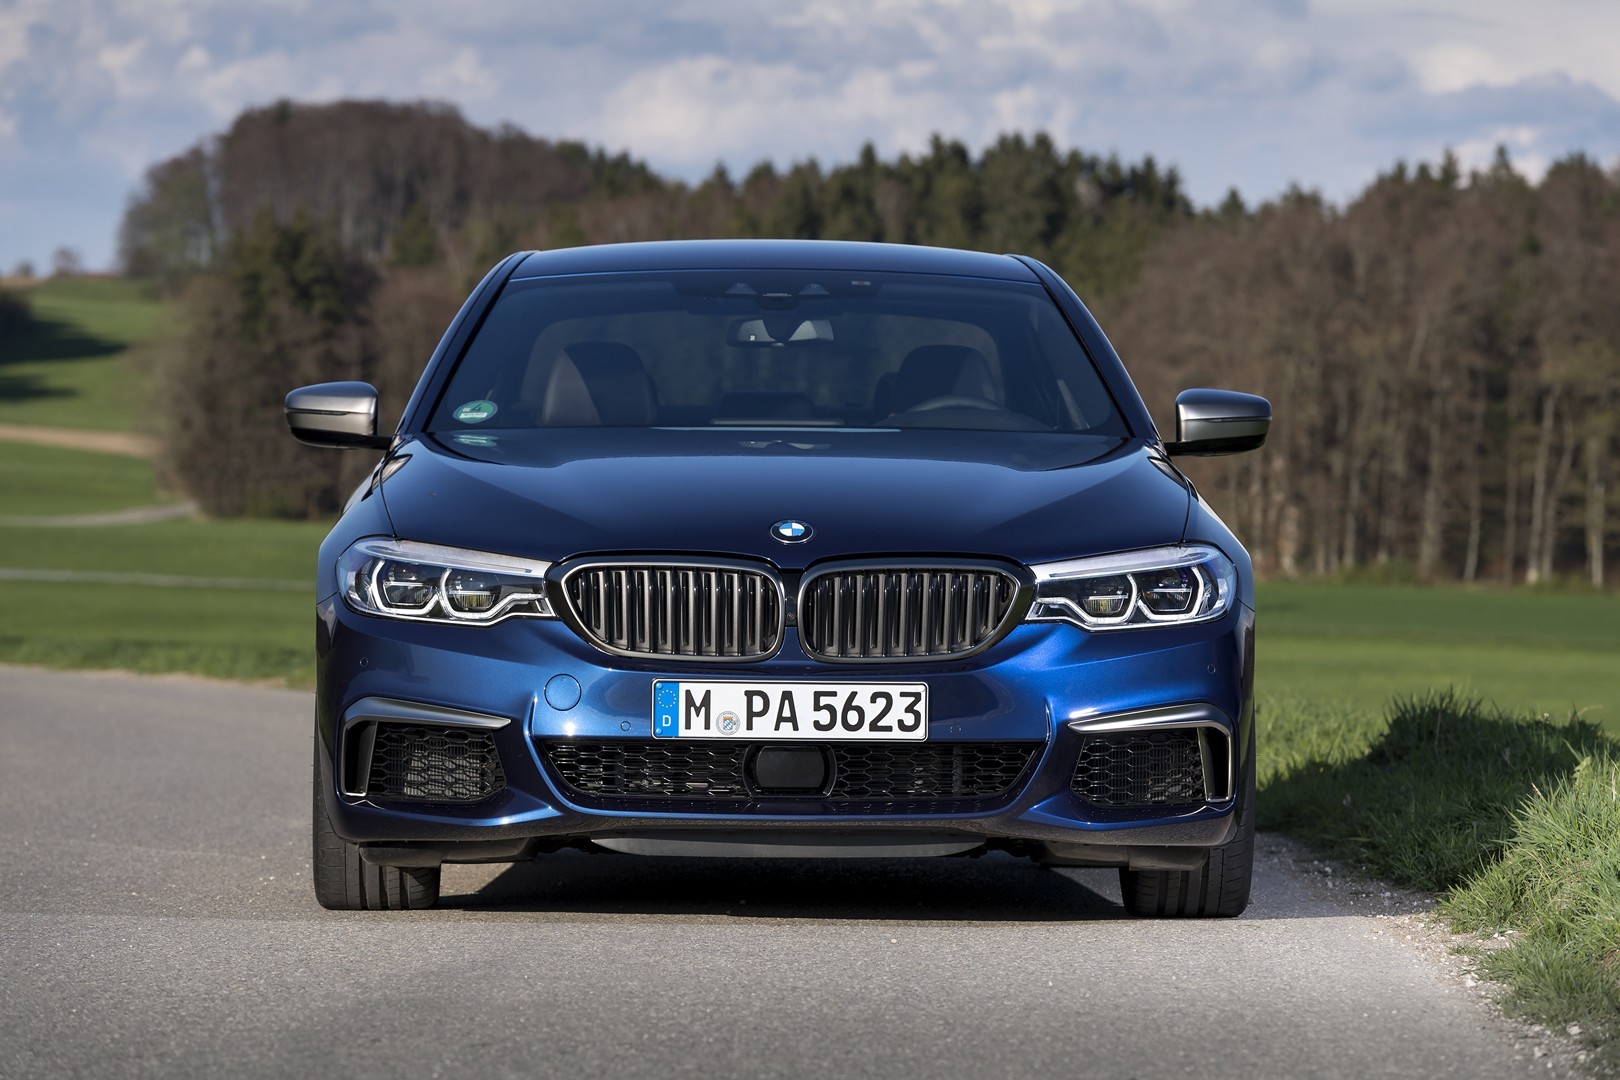 https://s1.cdn.autoevolution.com/images/news/gallery/bmw-squeezes-out-more-power-from-x3-m40i-x4-m40i-m550i-xdrive-in-the-us_10.jpg